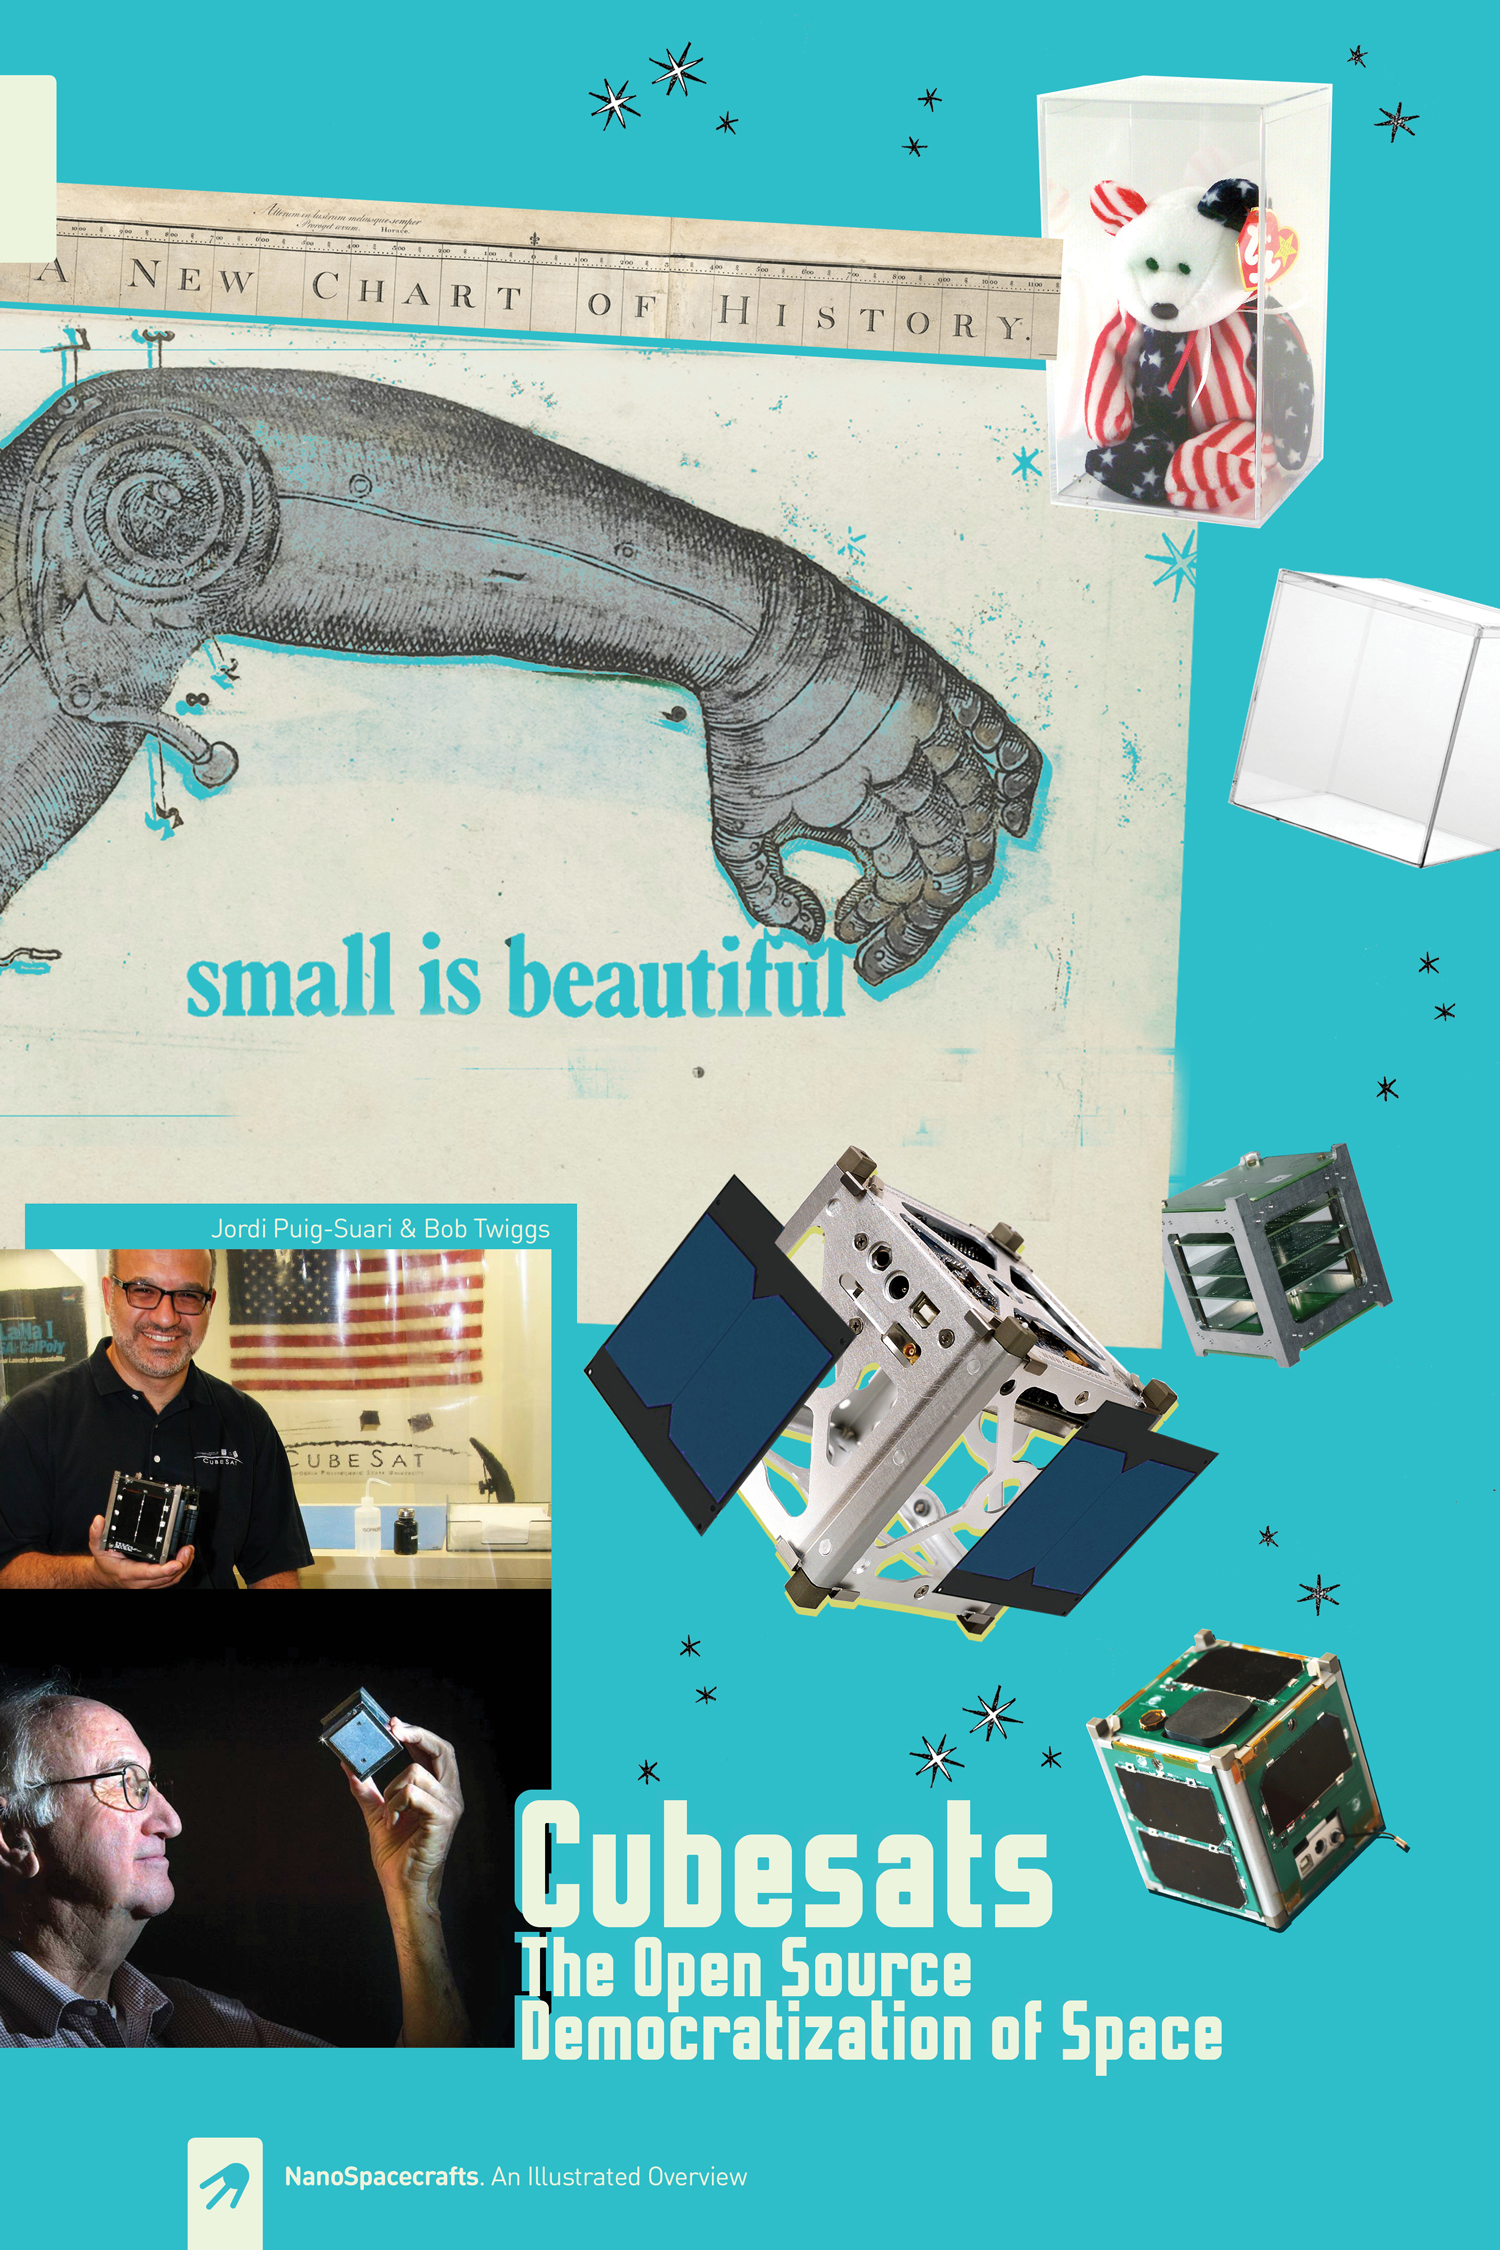 CUBESATS. The Open Source Democratization of Space